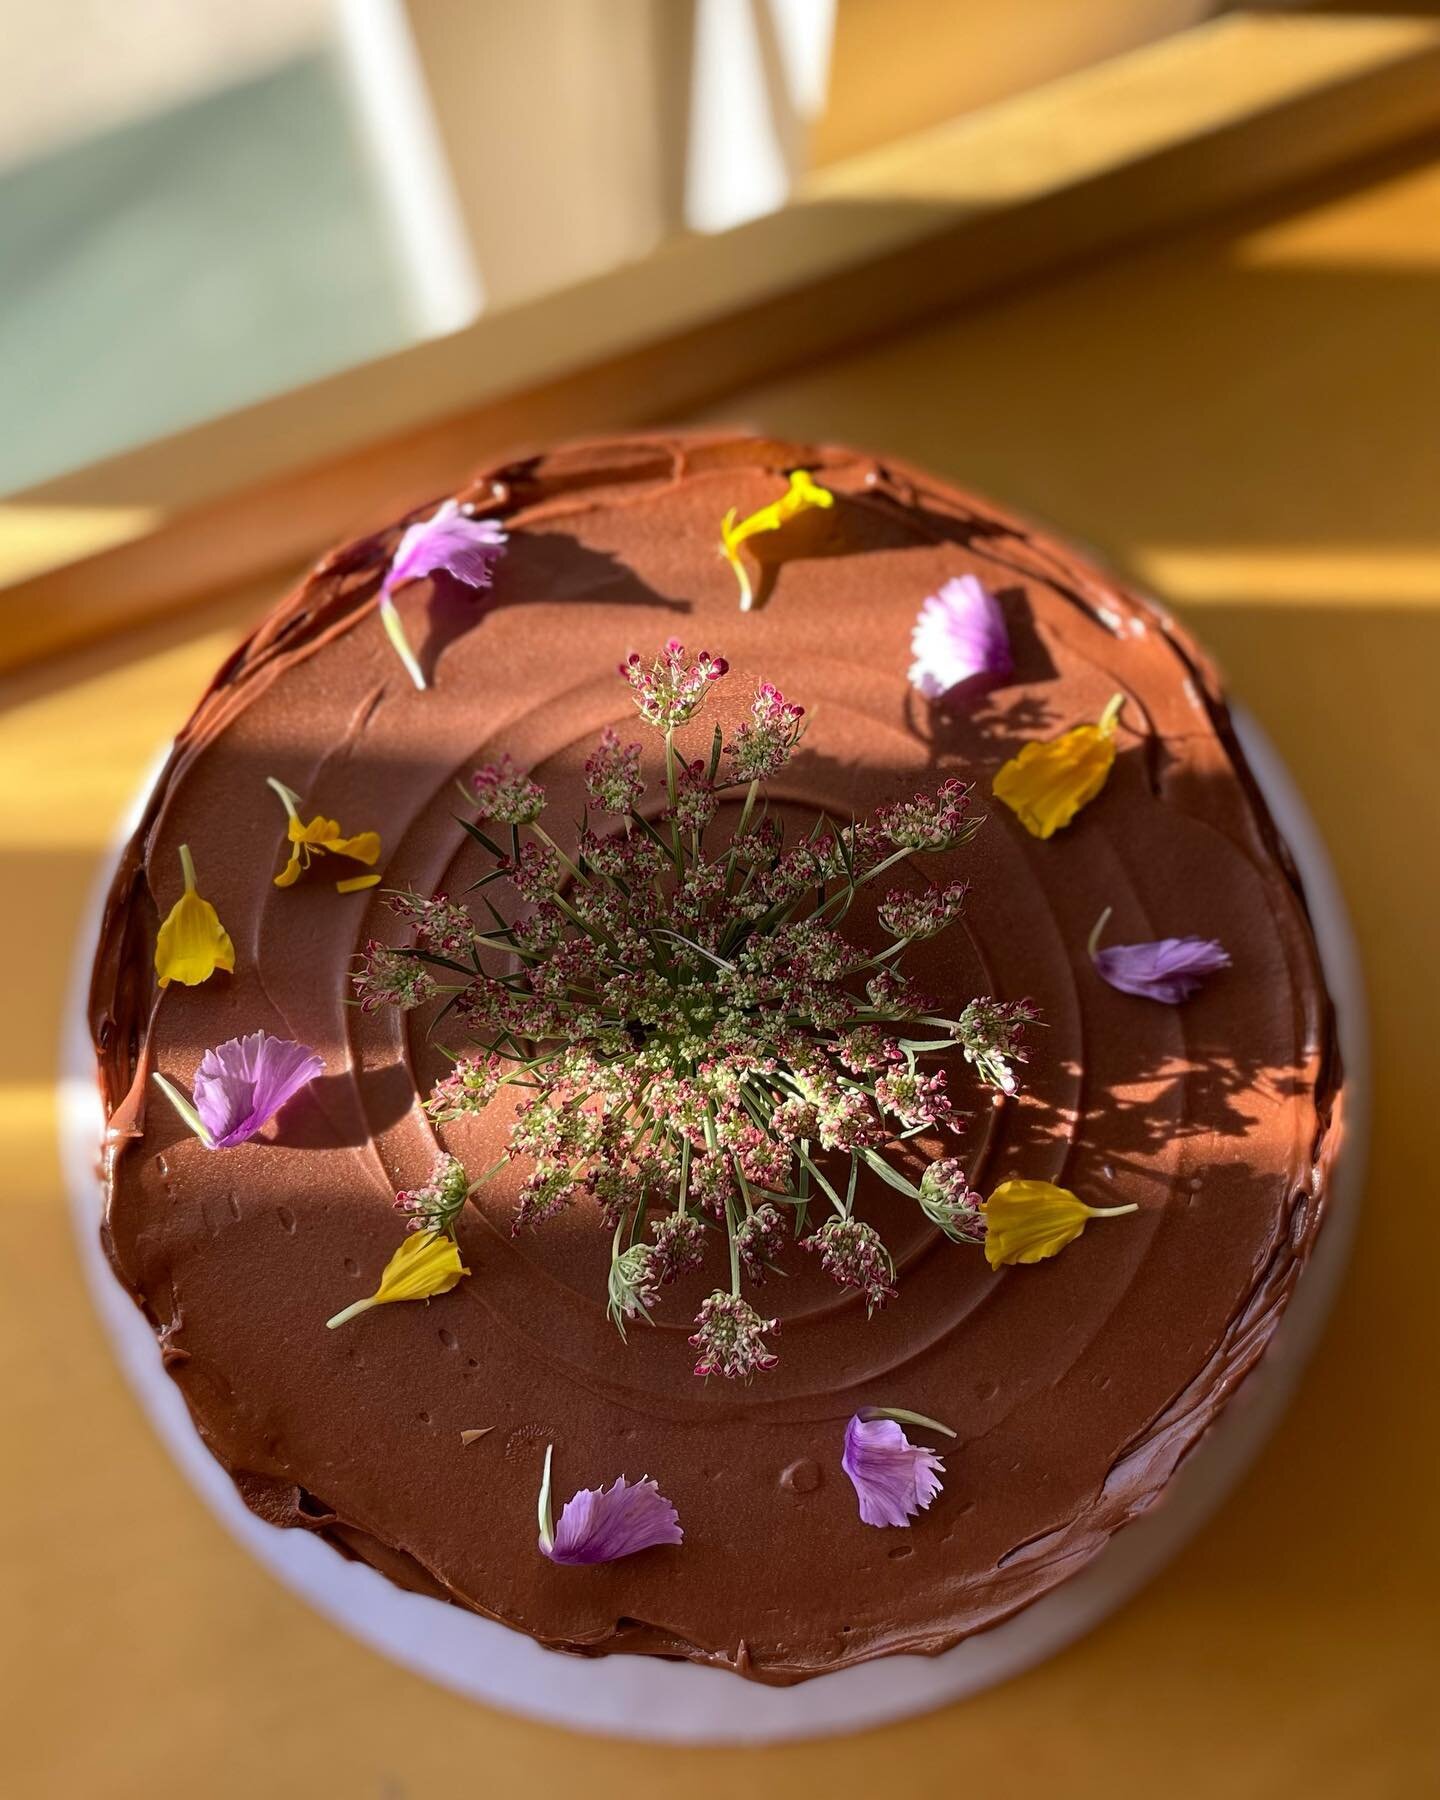 This little beauty is for sale on our online cake menu at cafetenby.com. It&rsquo;s &ldquo;The Classic!&rdquo; Need we say more. Well maybe just a little bit more: it&rsquo;s a delicious yellow cake with a rich chocolate frosting. And this gem can be